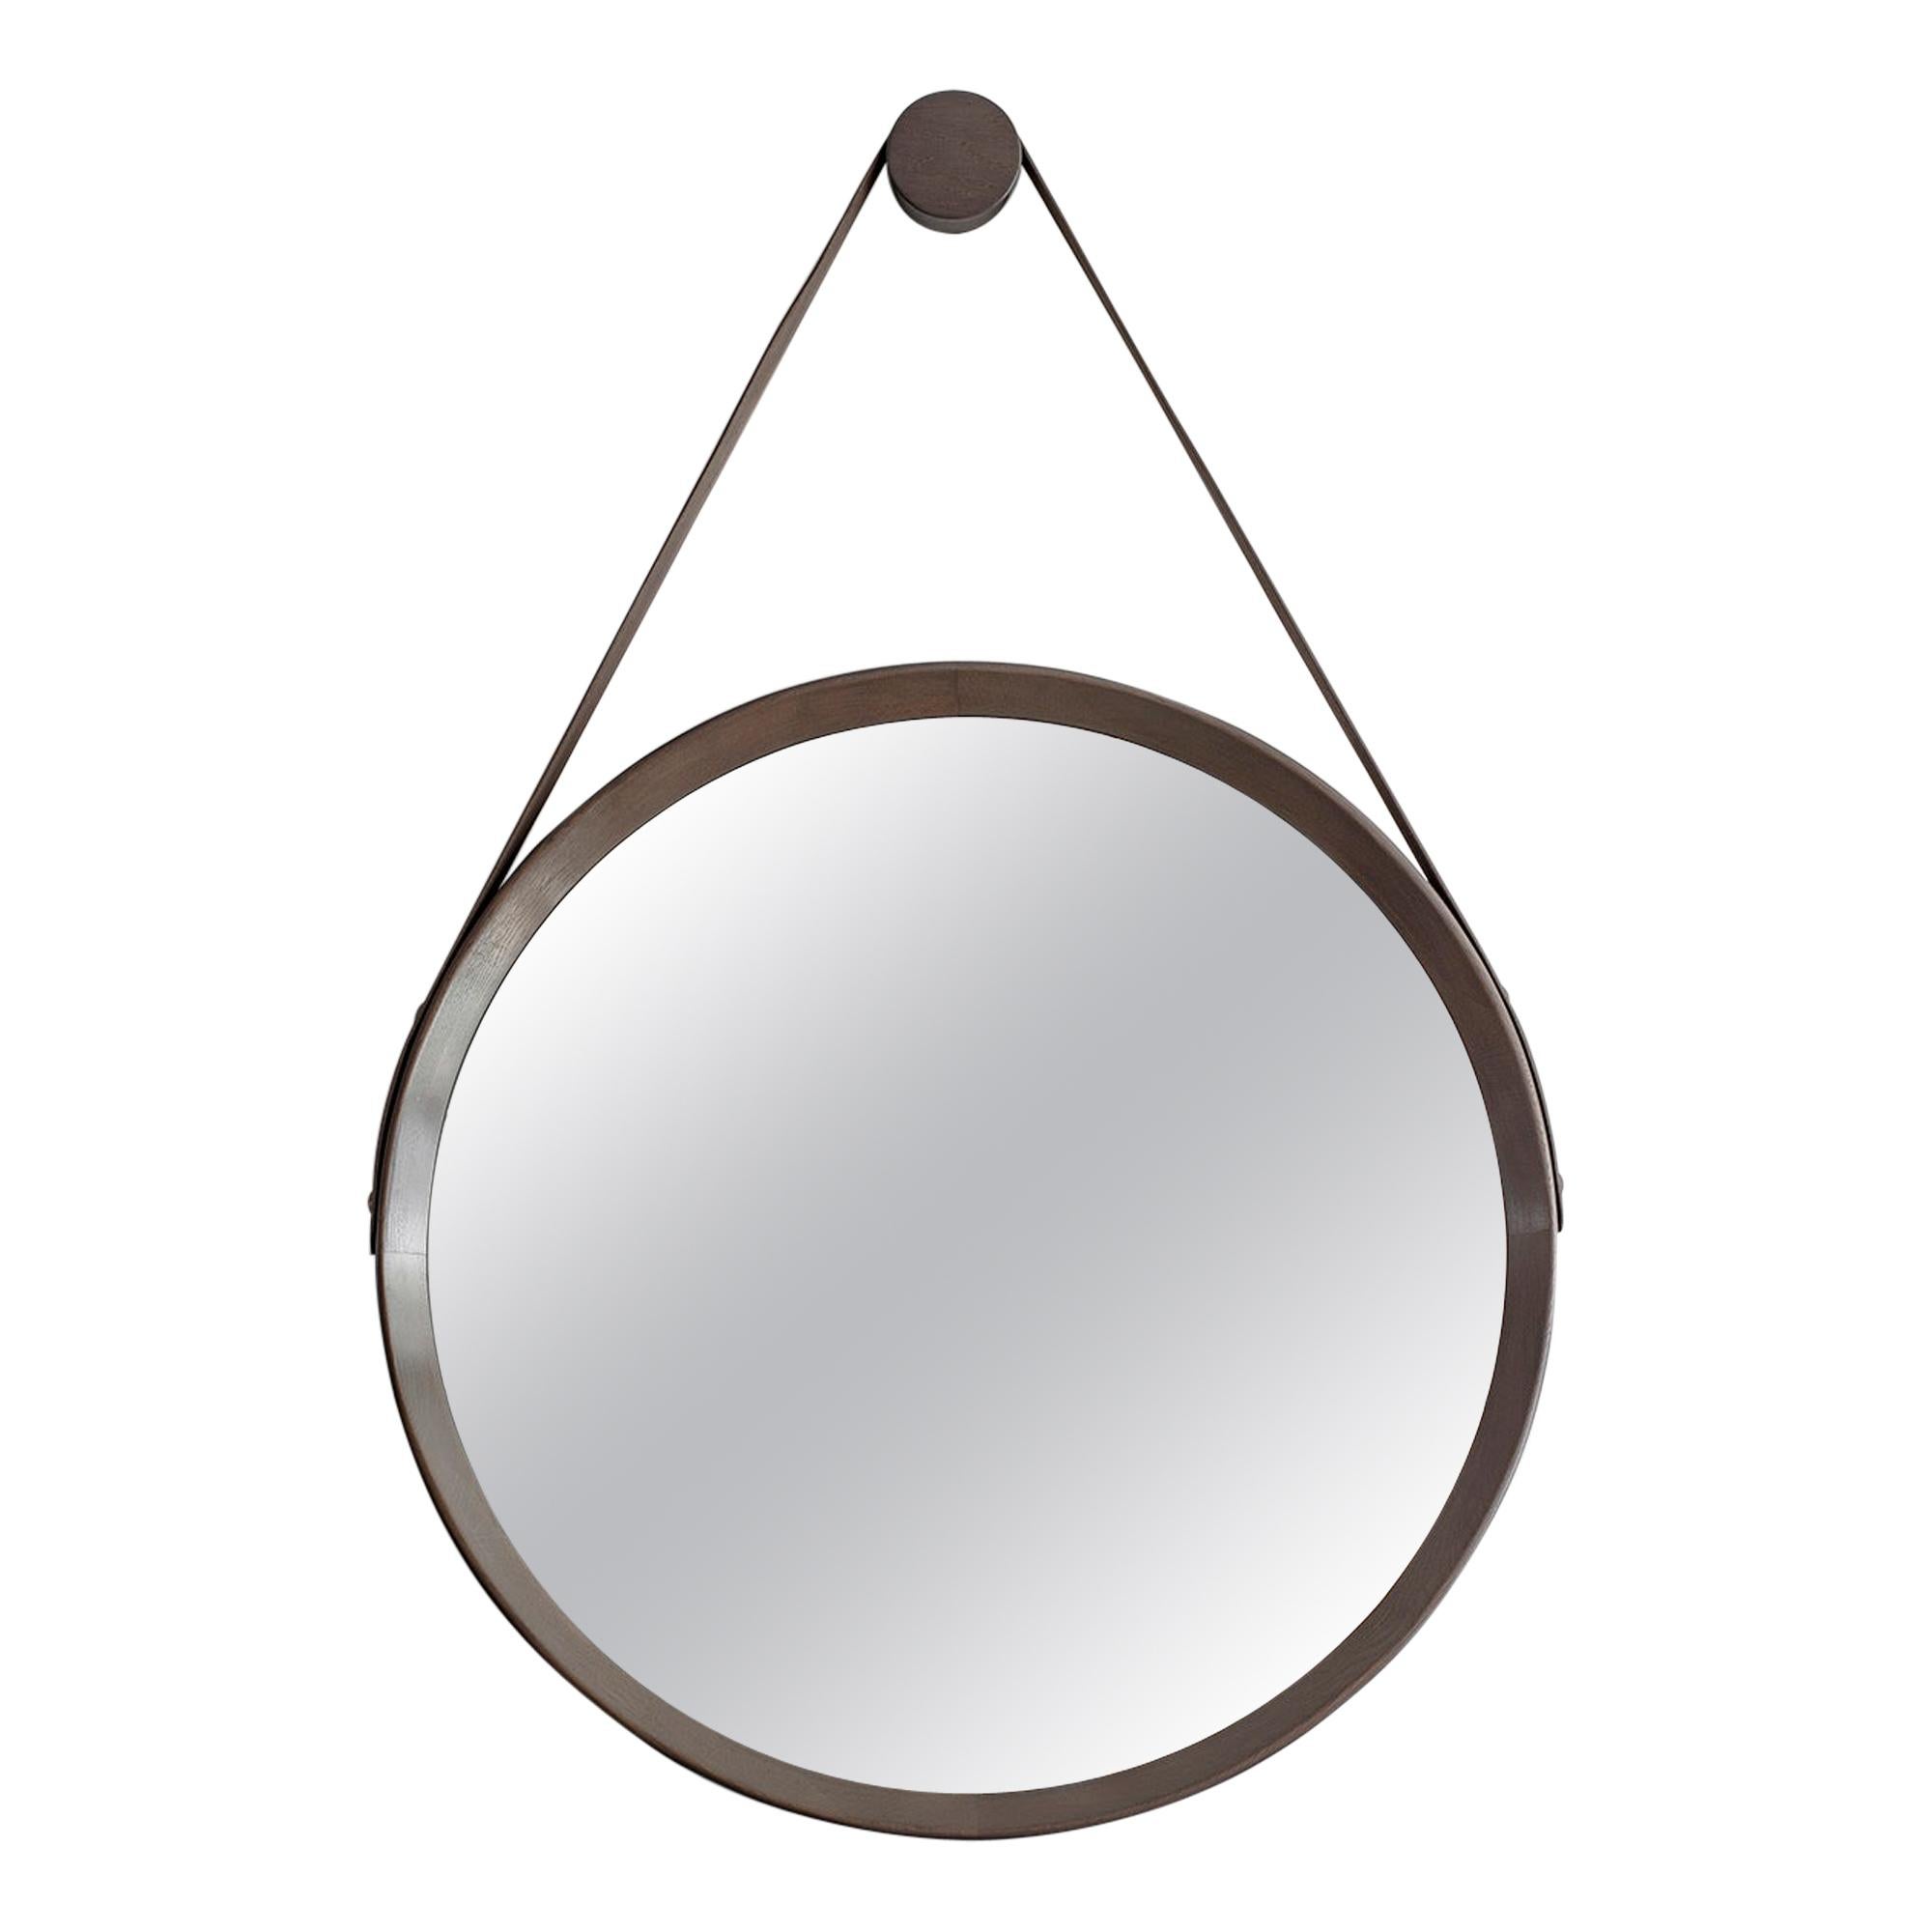 Beverly Oak and Leather Round Mirror, Stone Grey